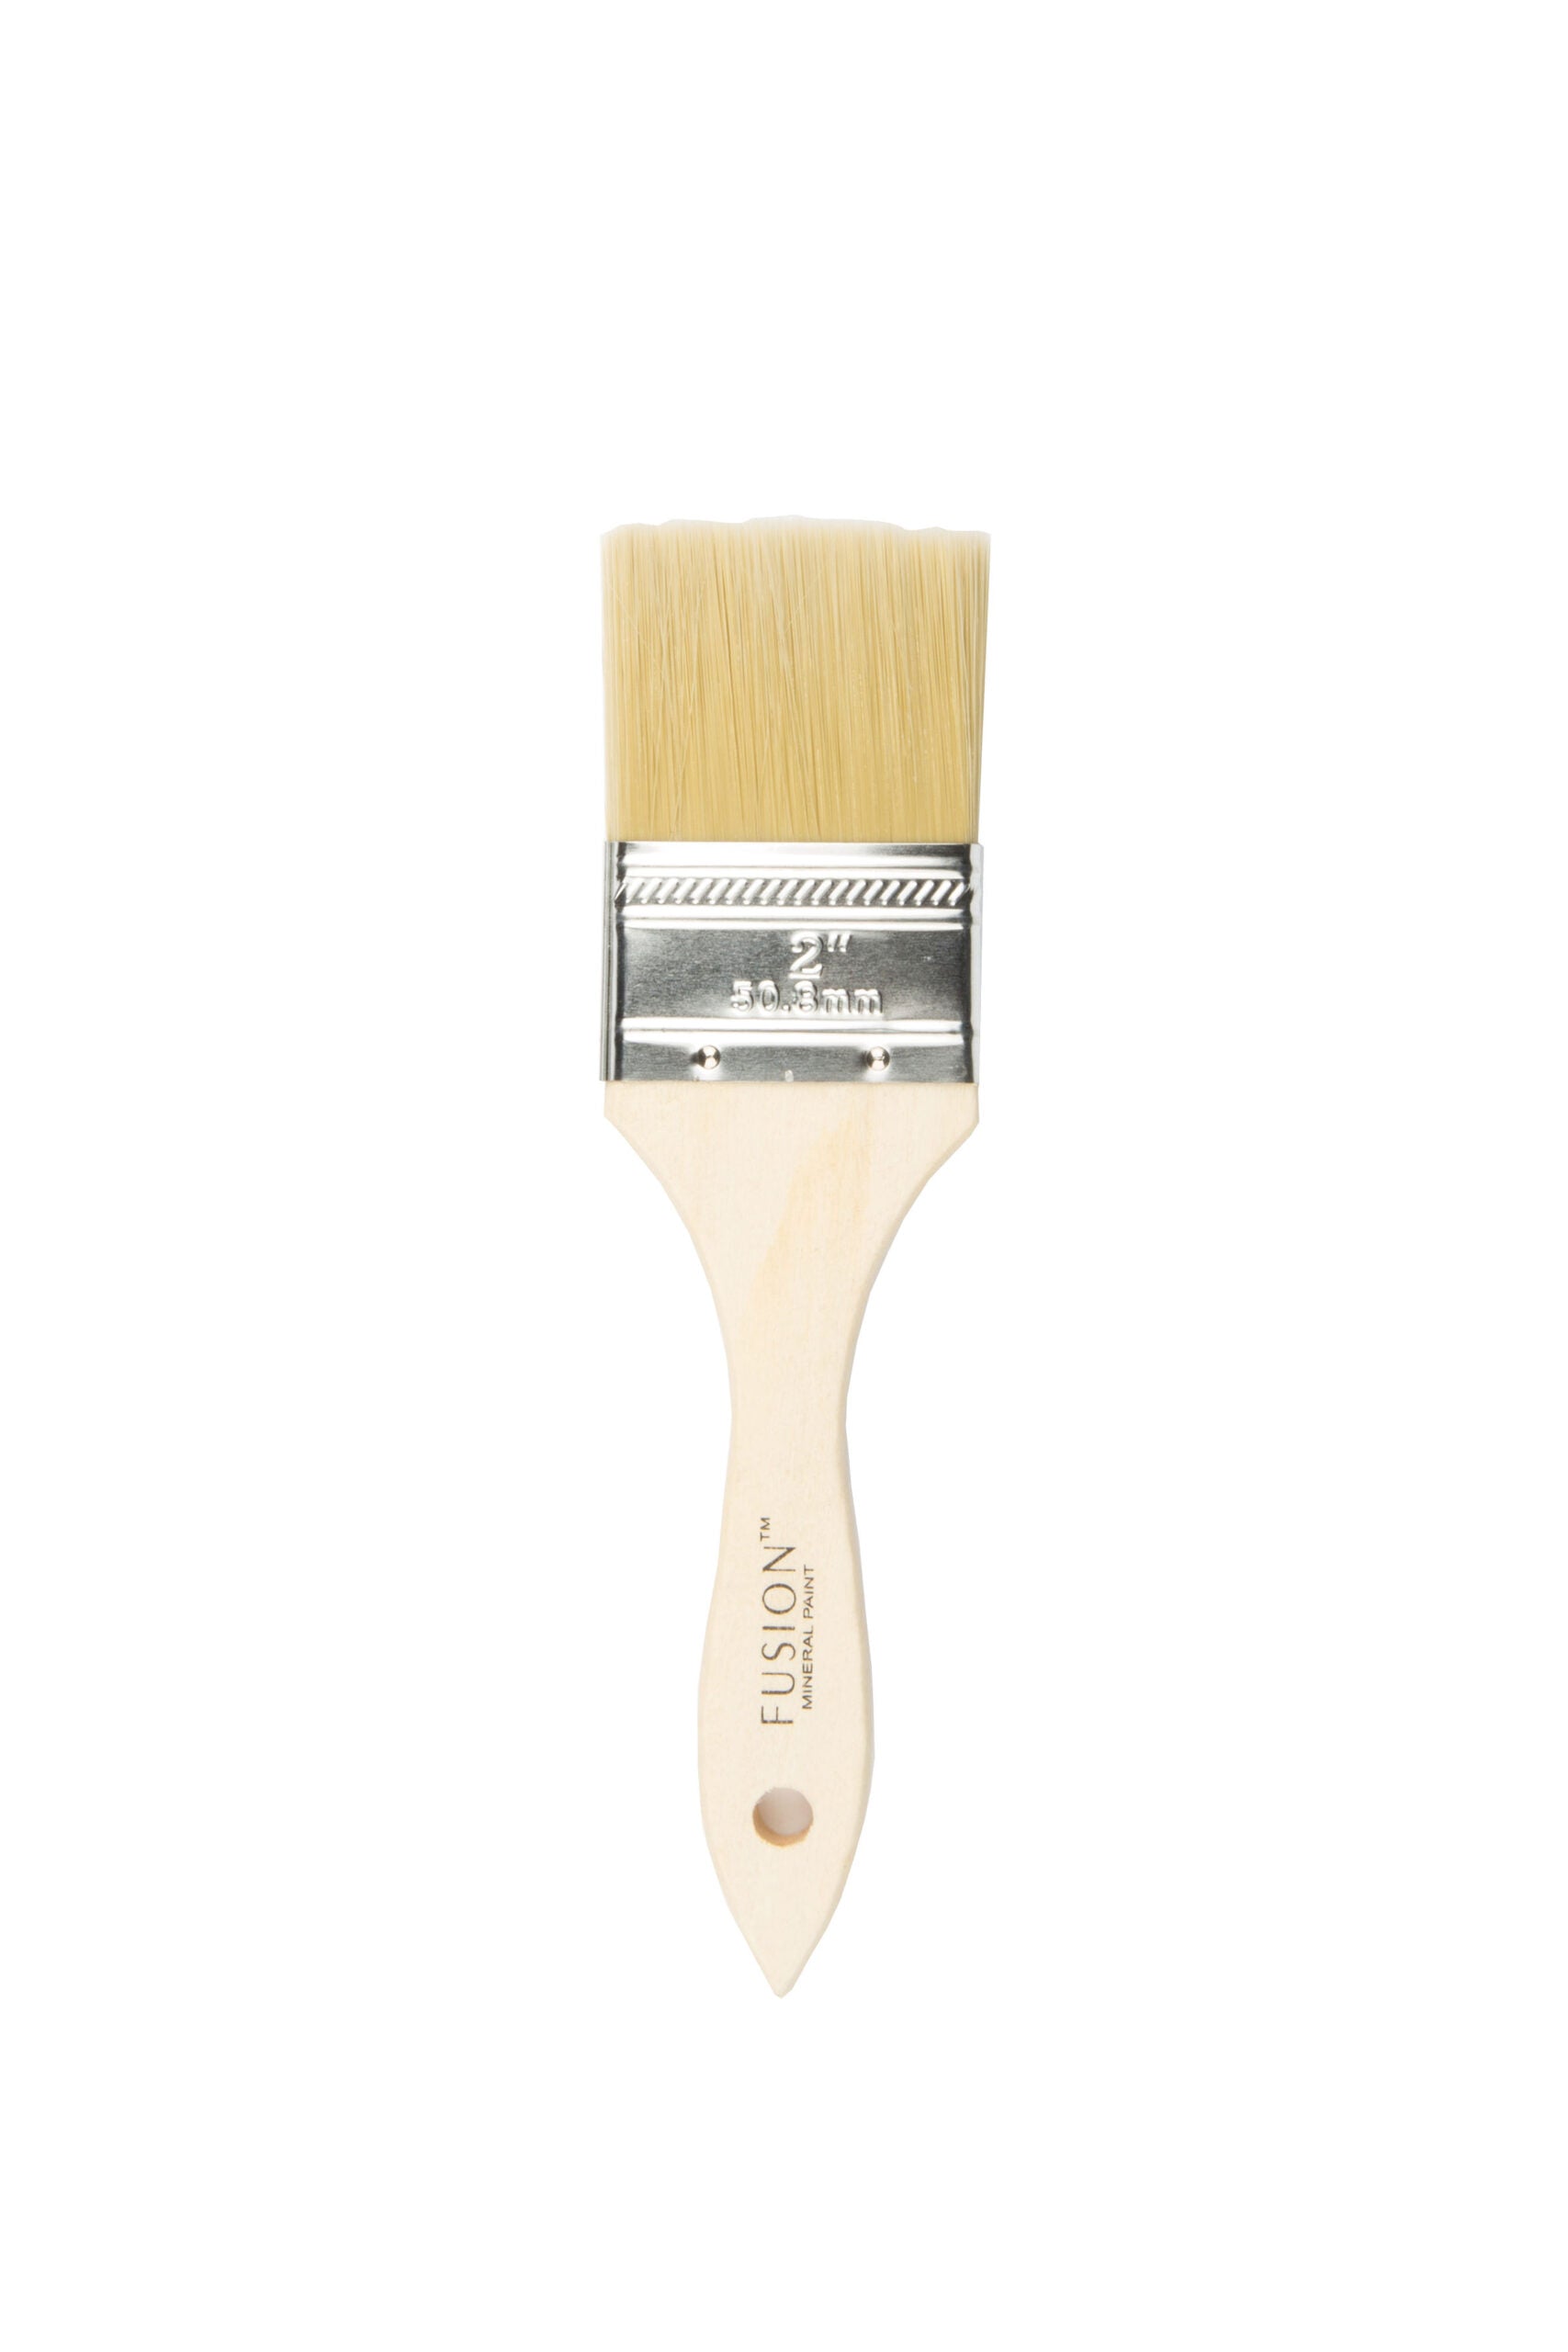 Fusion FLAT PAINT BRUSH  2" | fusion-flat-paint-brush-2 | Refinished P/L